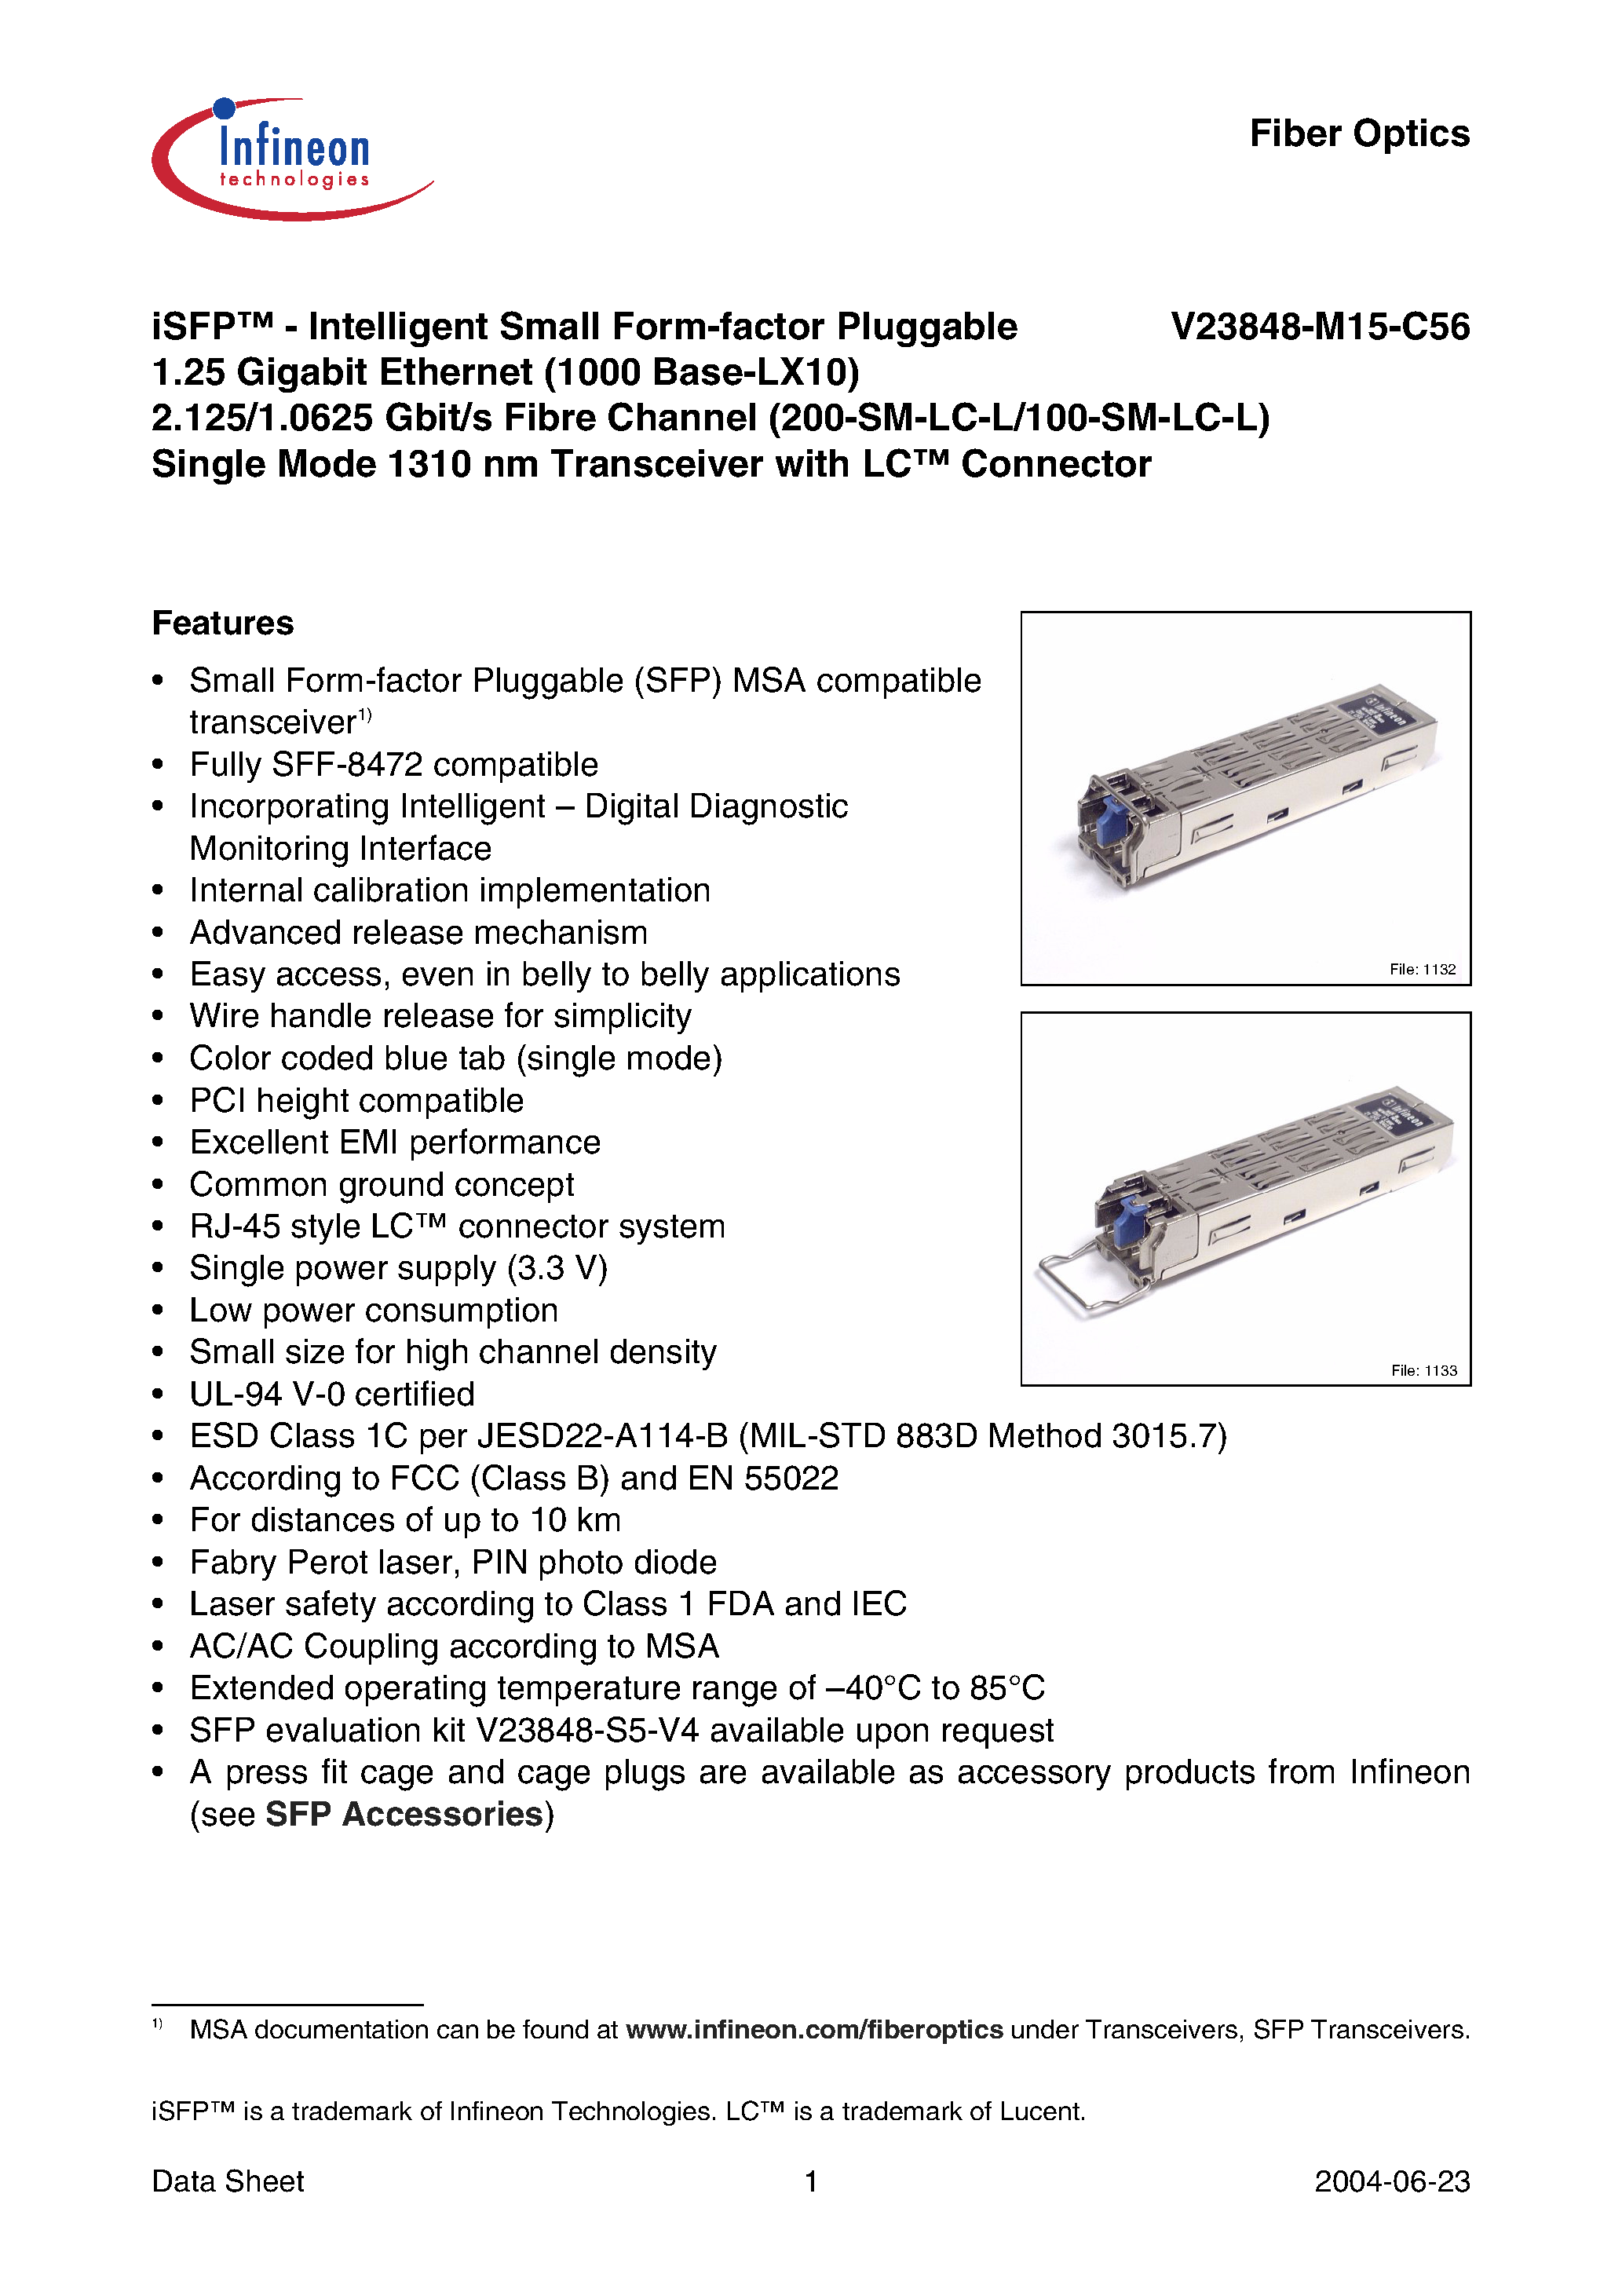 Datasheet V23848-M15-C56 - iSFP-Intelligent Small Form-factor Pluggable 1.25 Gigabit Ethernet 2.125/1.0625 Gbit/s Fibre Channel Single Mode 1310 nm Transceiver with LC Connector page 1